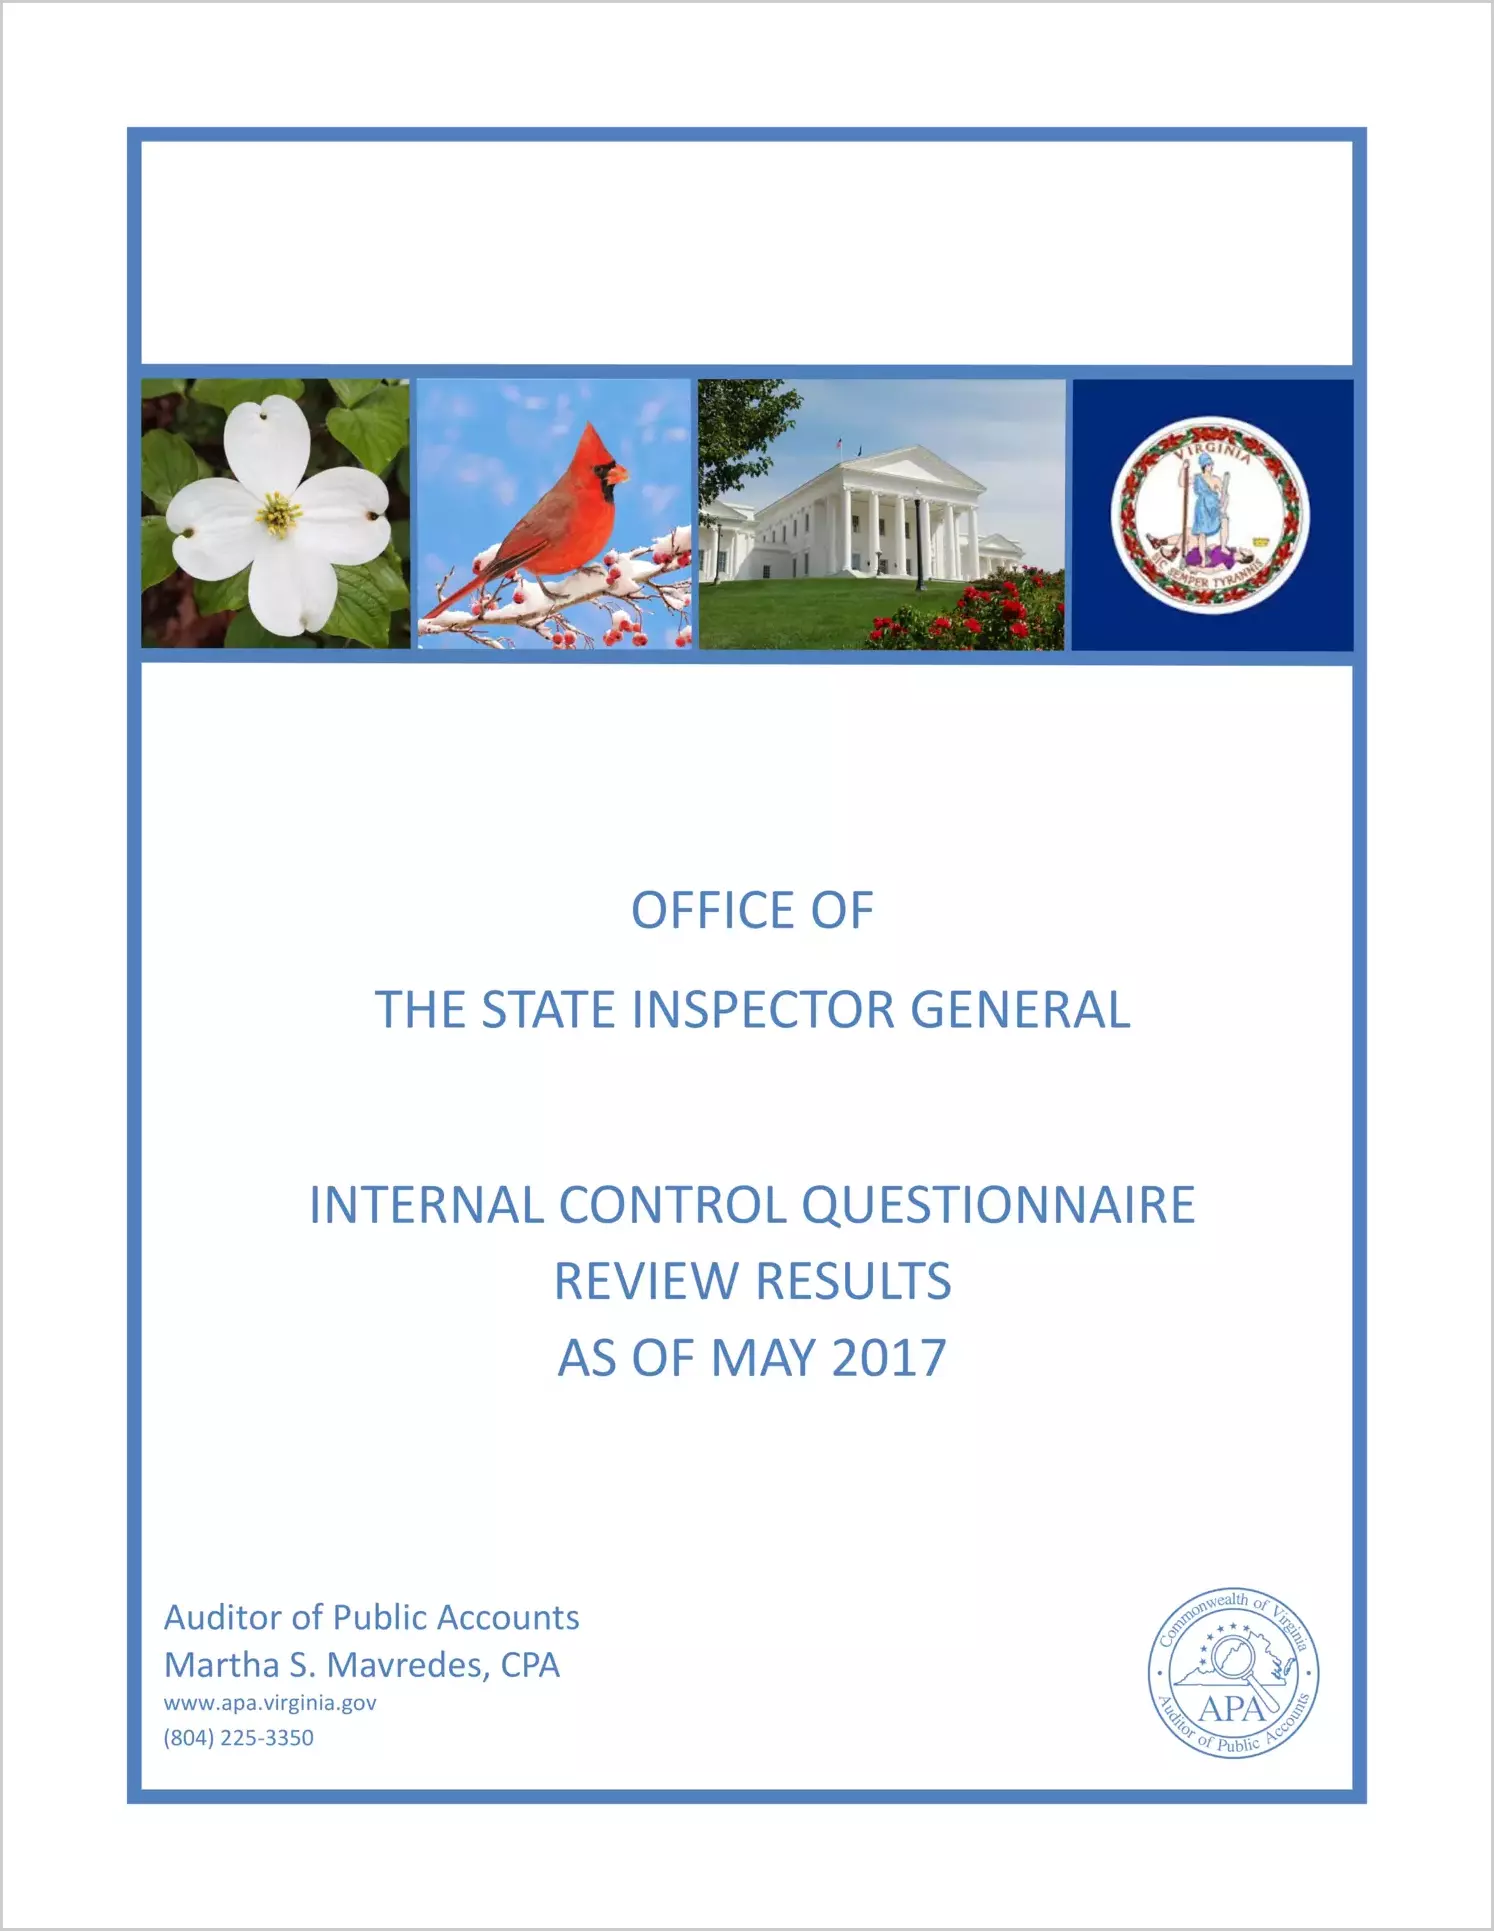 Office of the State Inspector General Internal Control Questionnaire Review as of May 2017